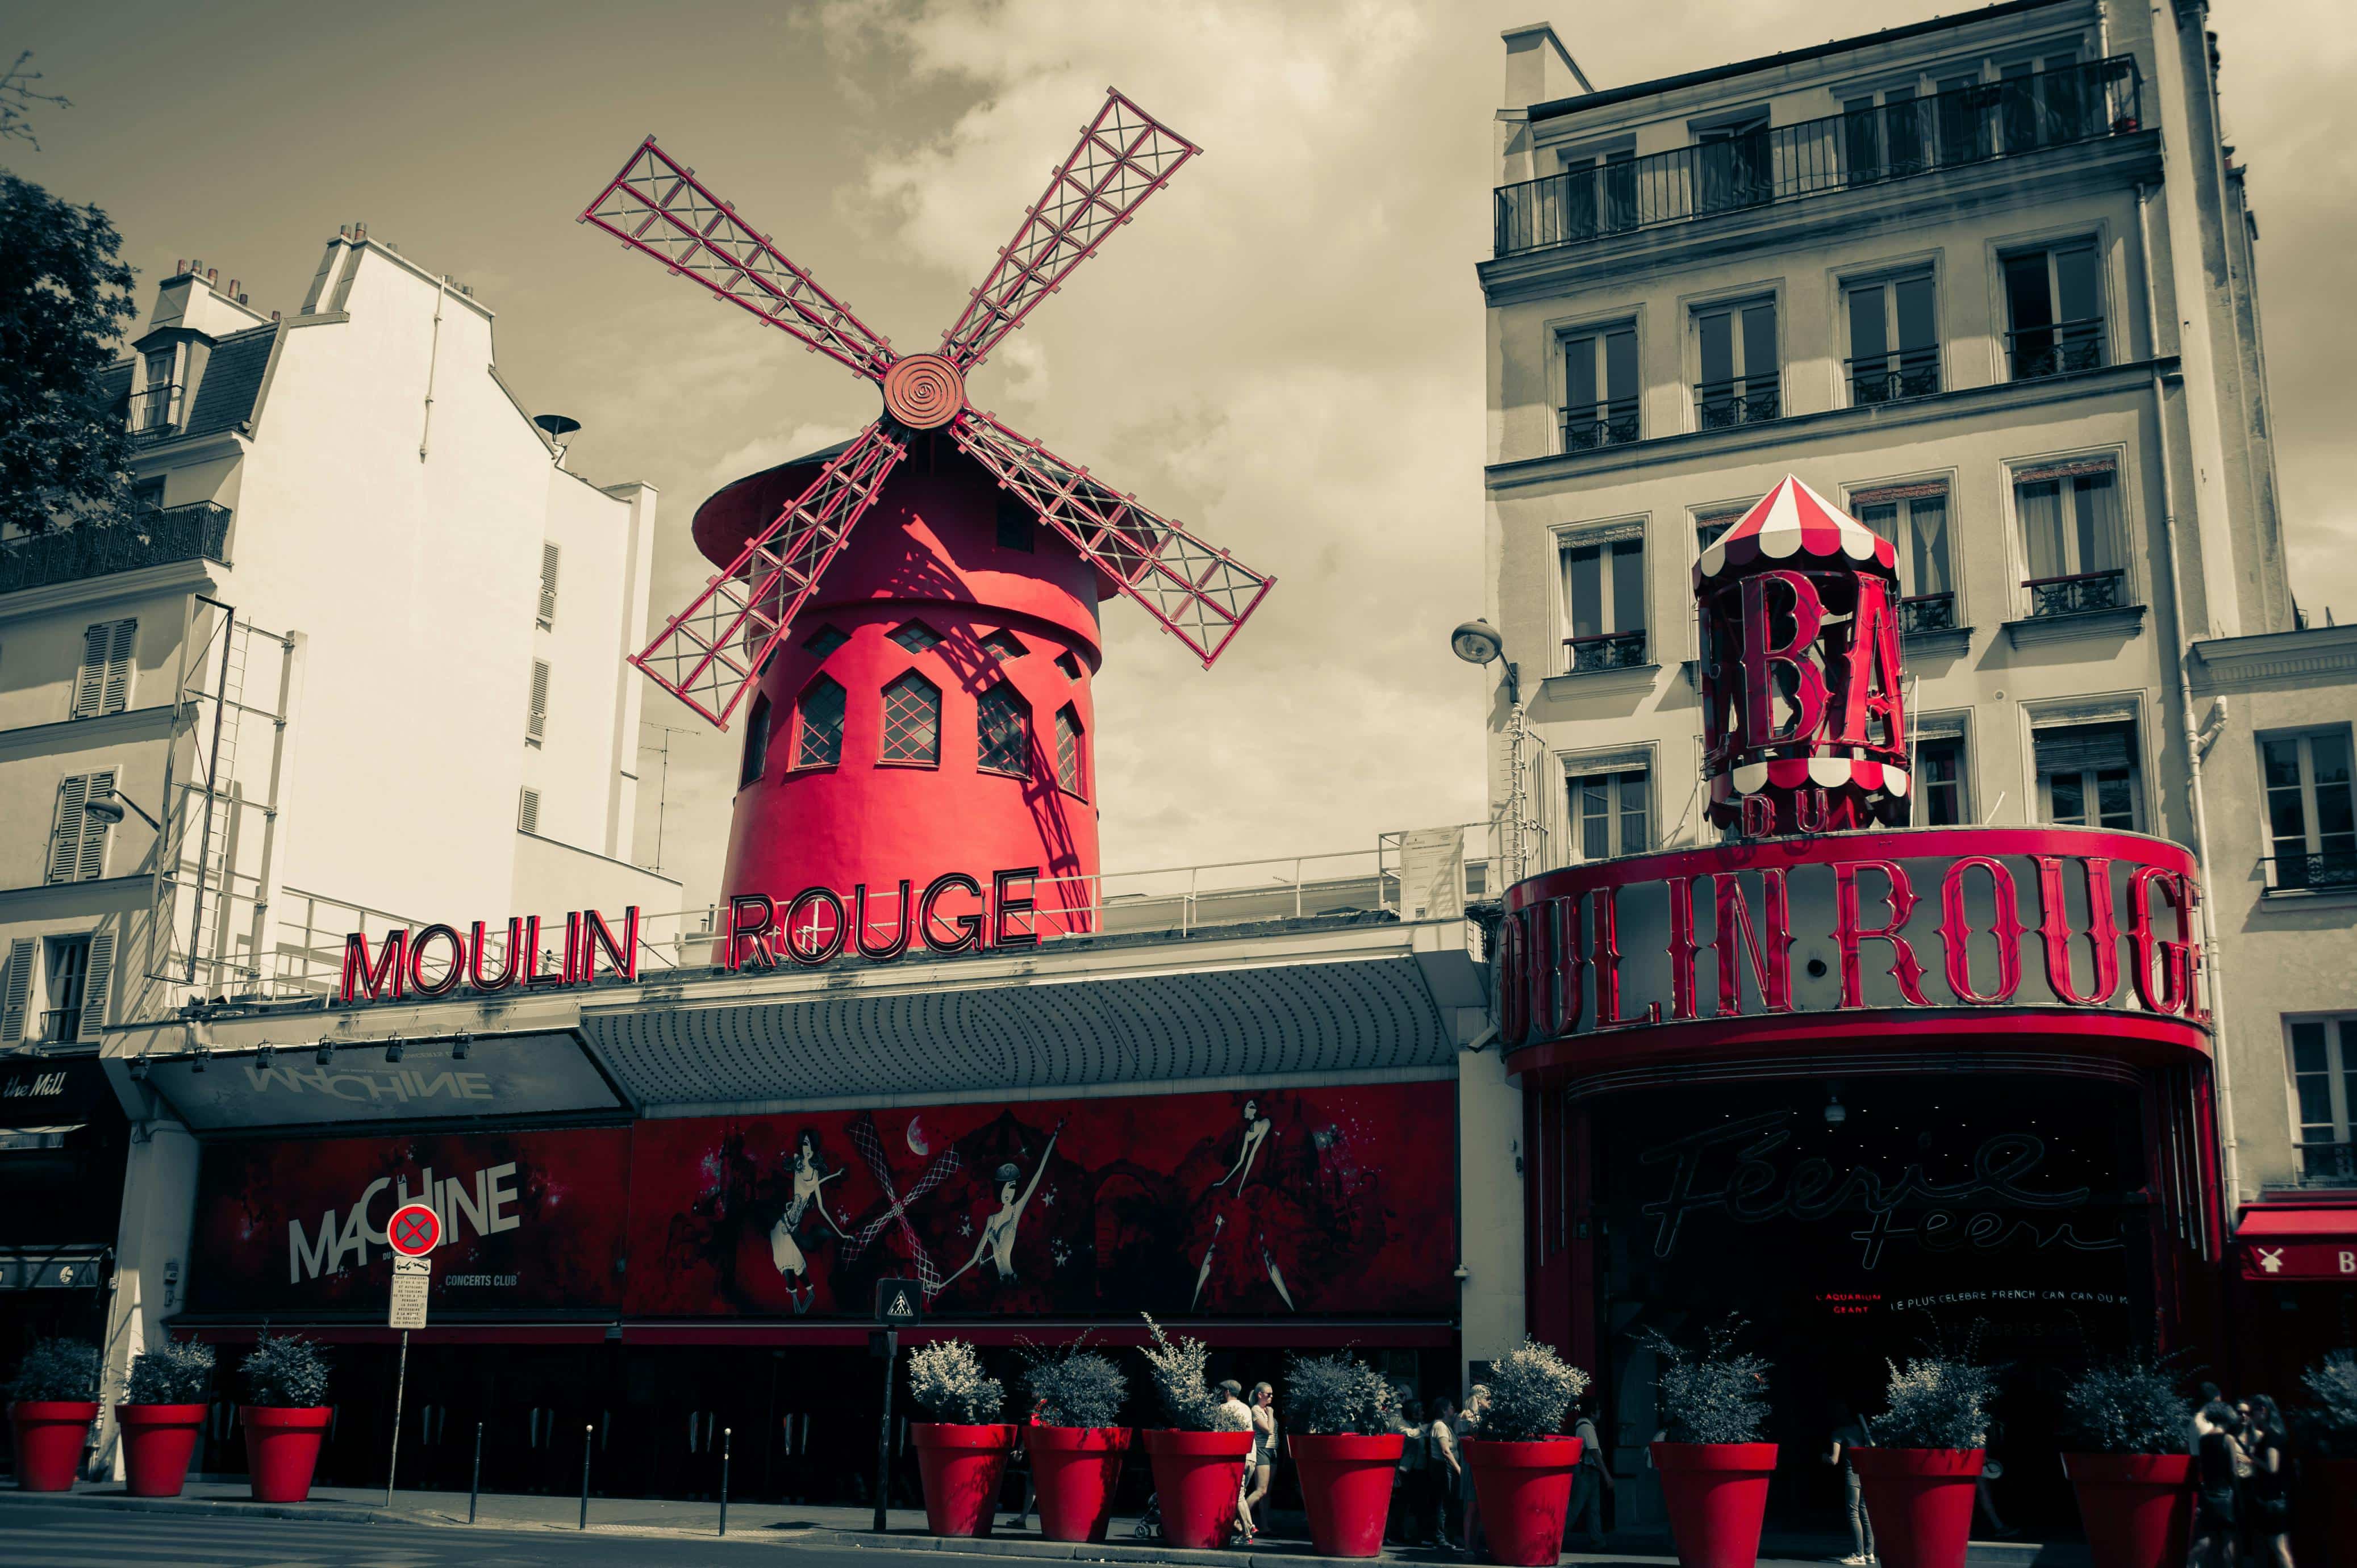 The Moulin Rouge in Paris